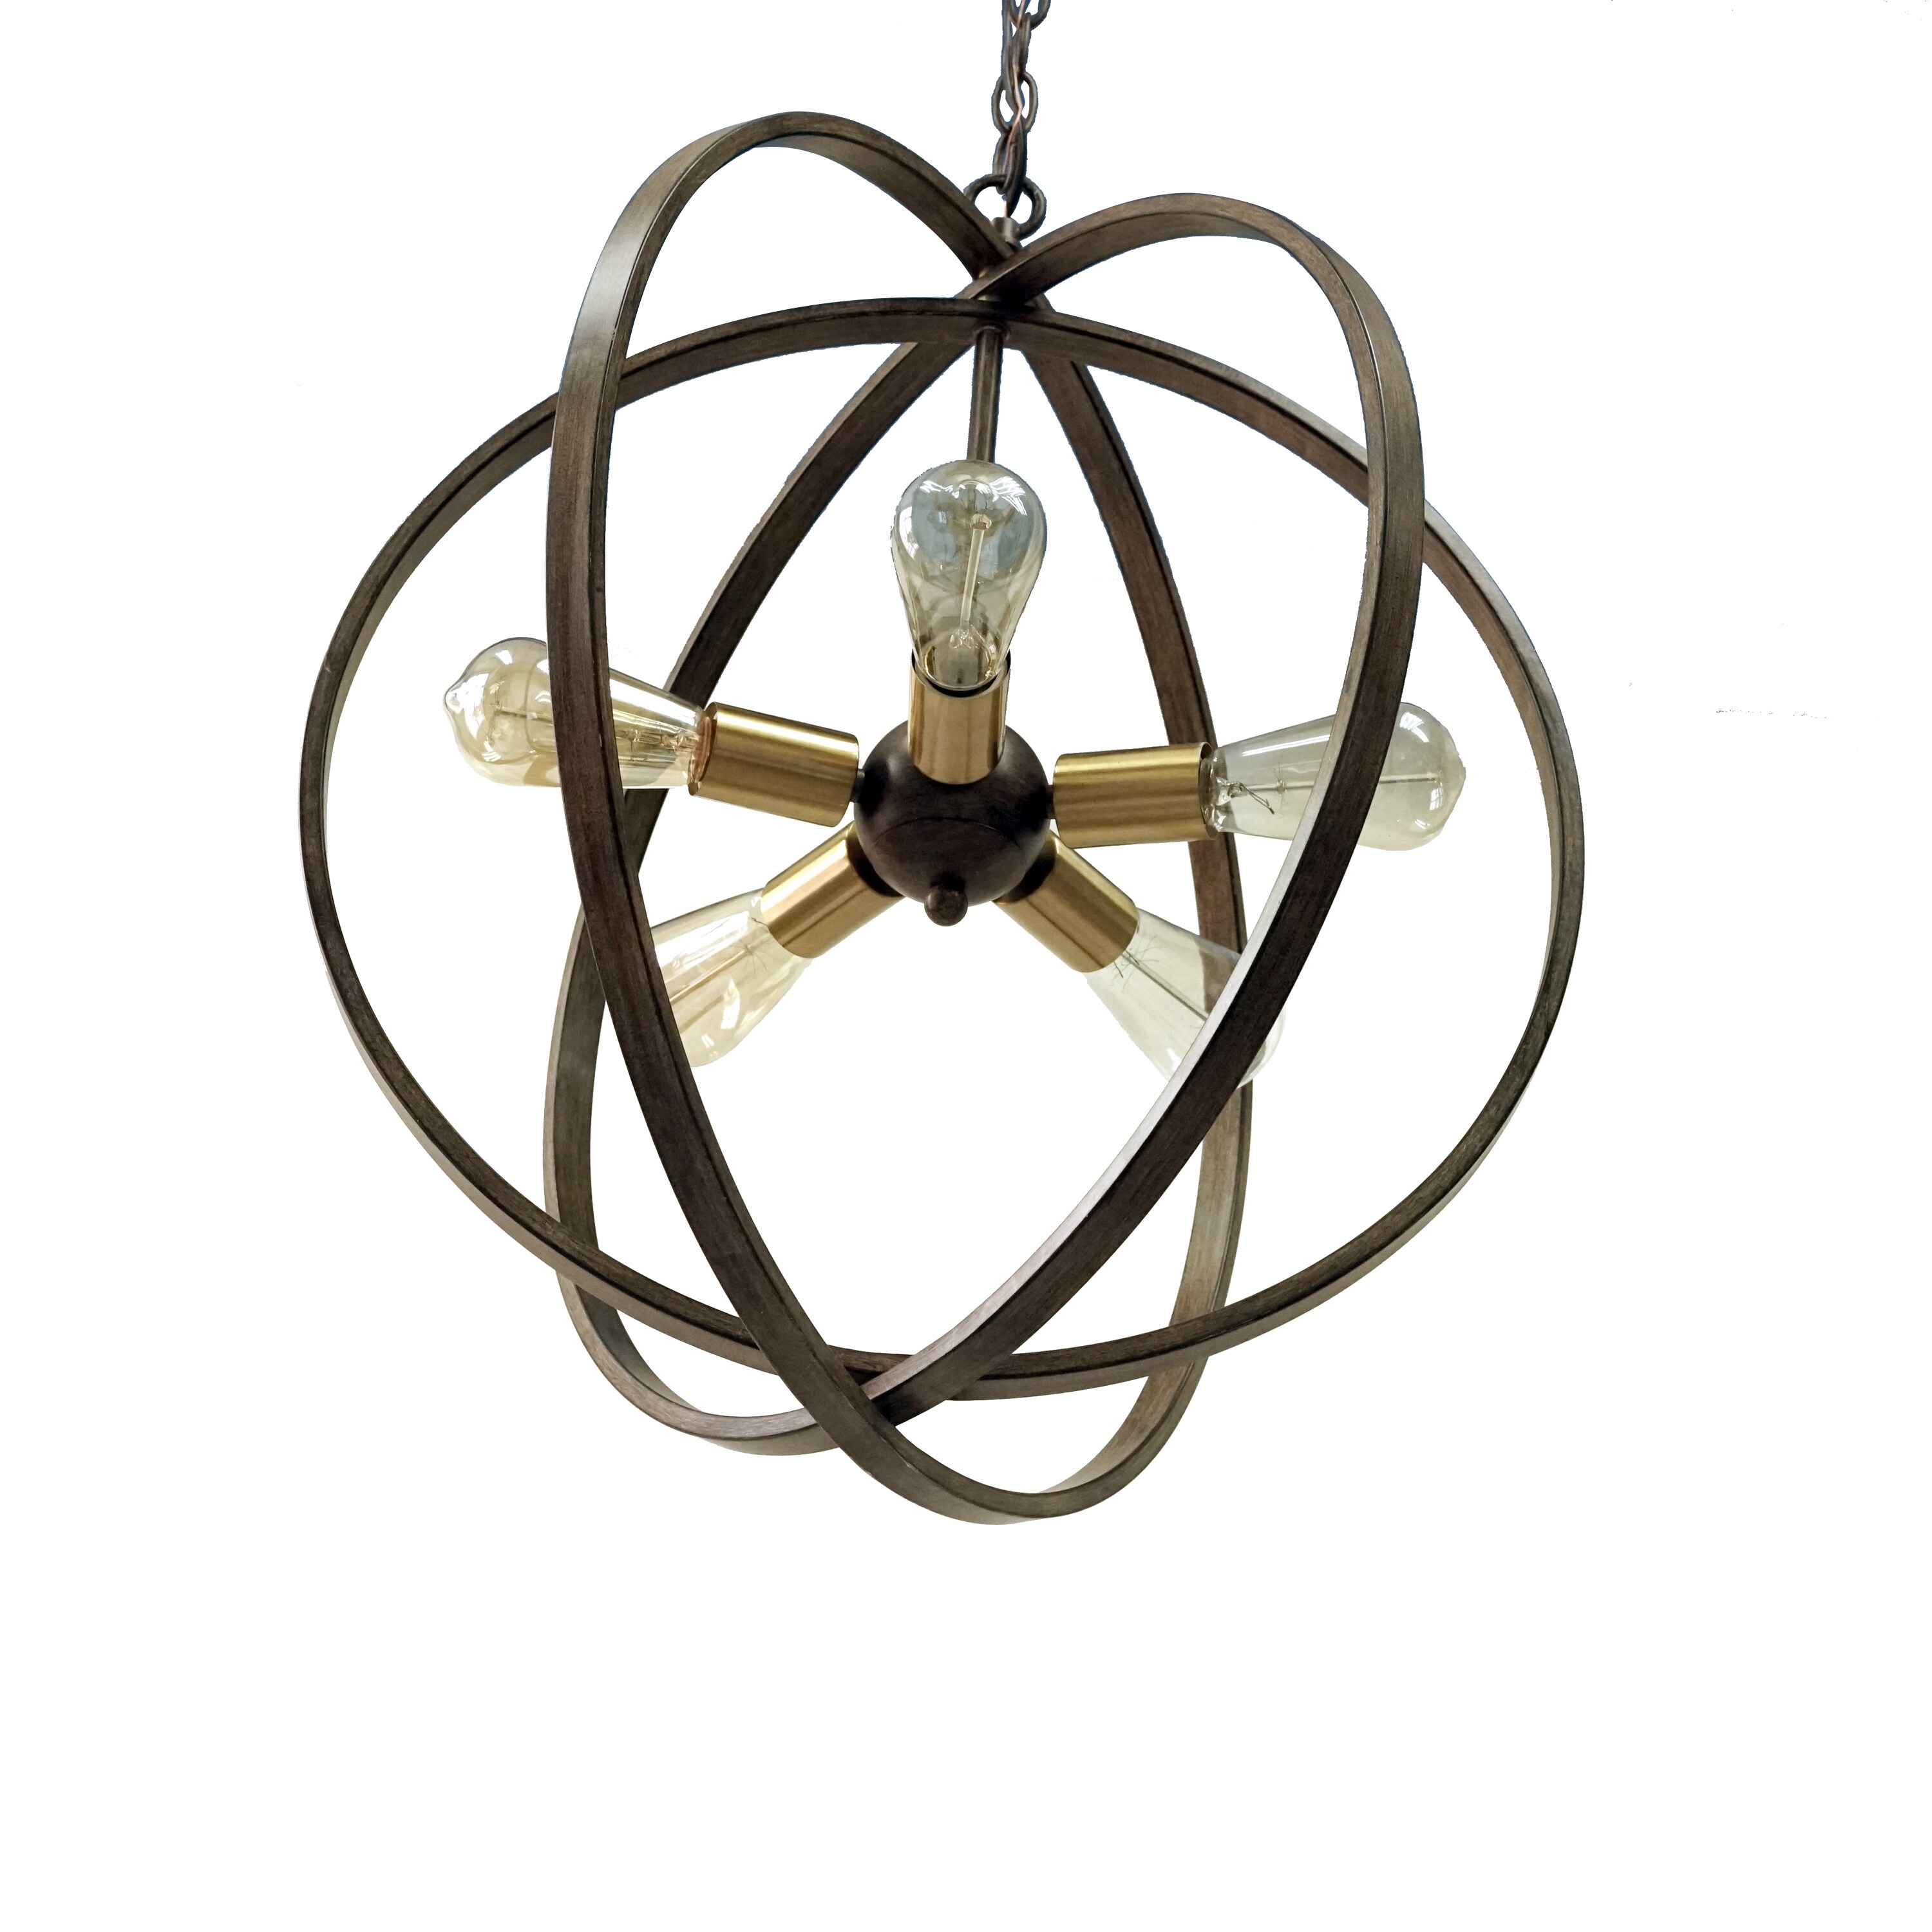 BAYCHEER Industrial Vintage Style Wrought Iron Metal Flush Mount Ceiling Light Lamp with 8 E26 Bulb Sockets in Nickel